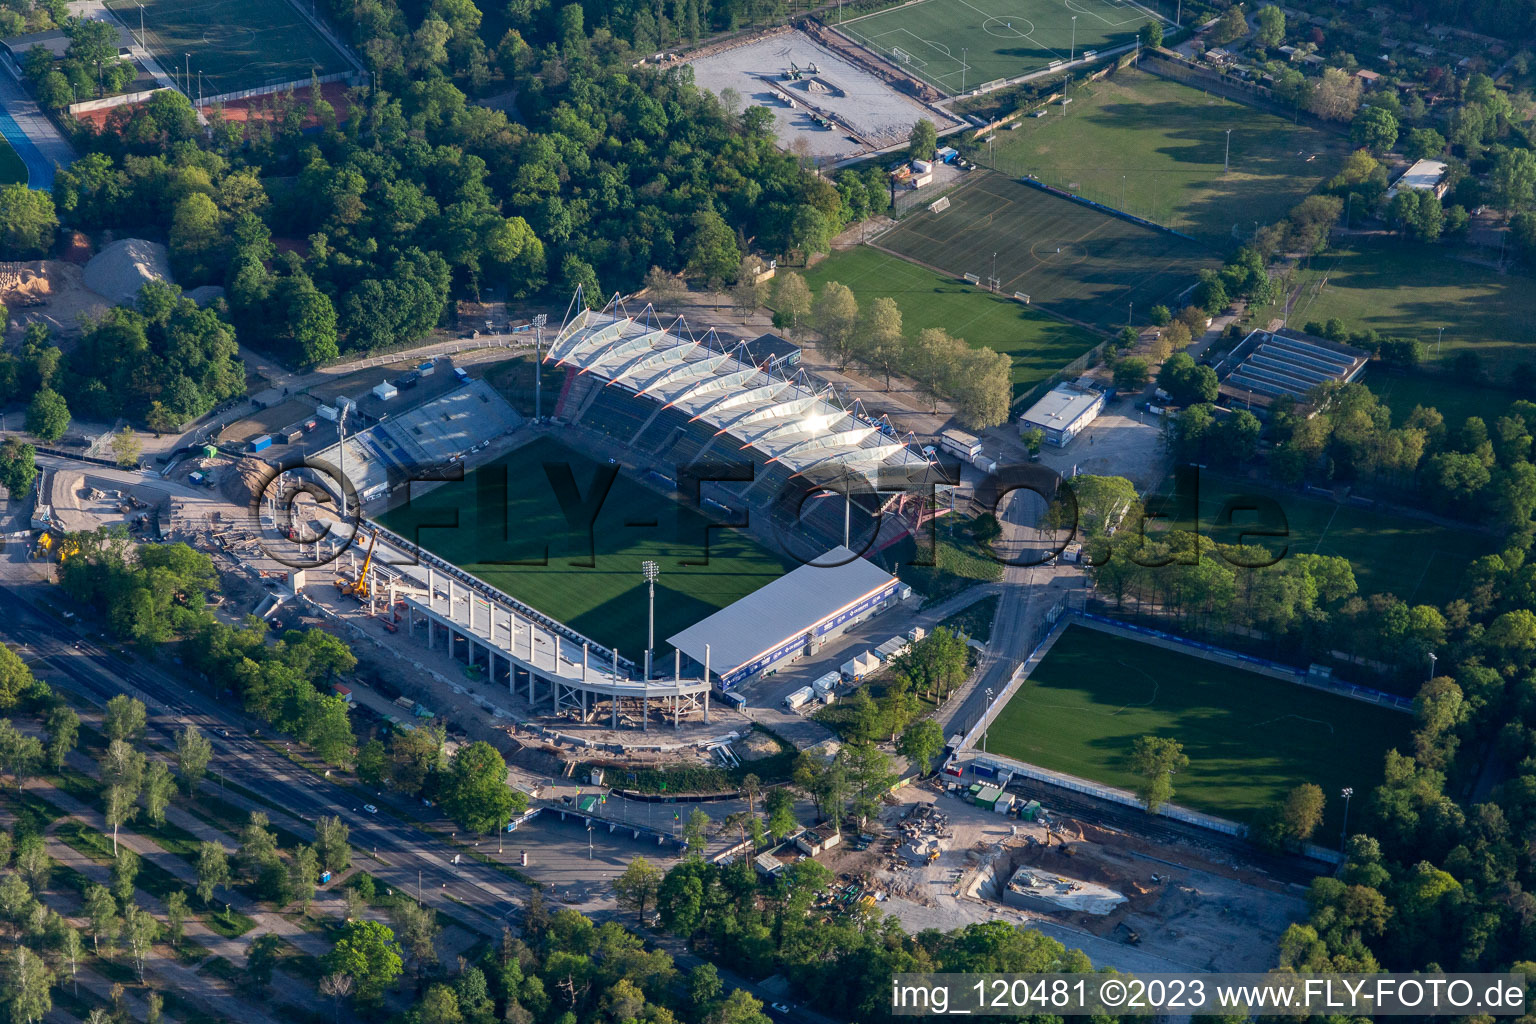 Aerial photograpy of Extension and conversion site on the sports ground of the stadium " Wildparkstadion " in Karlsruhe in the state Baden-Wurttemberg, Germany